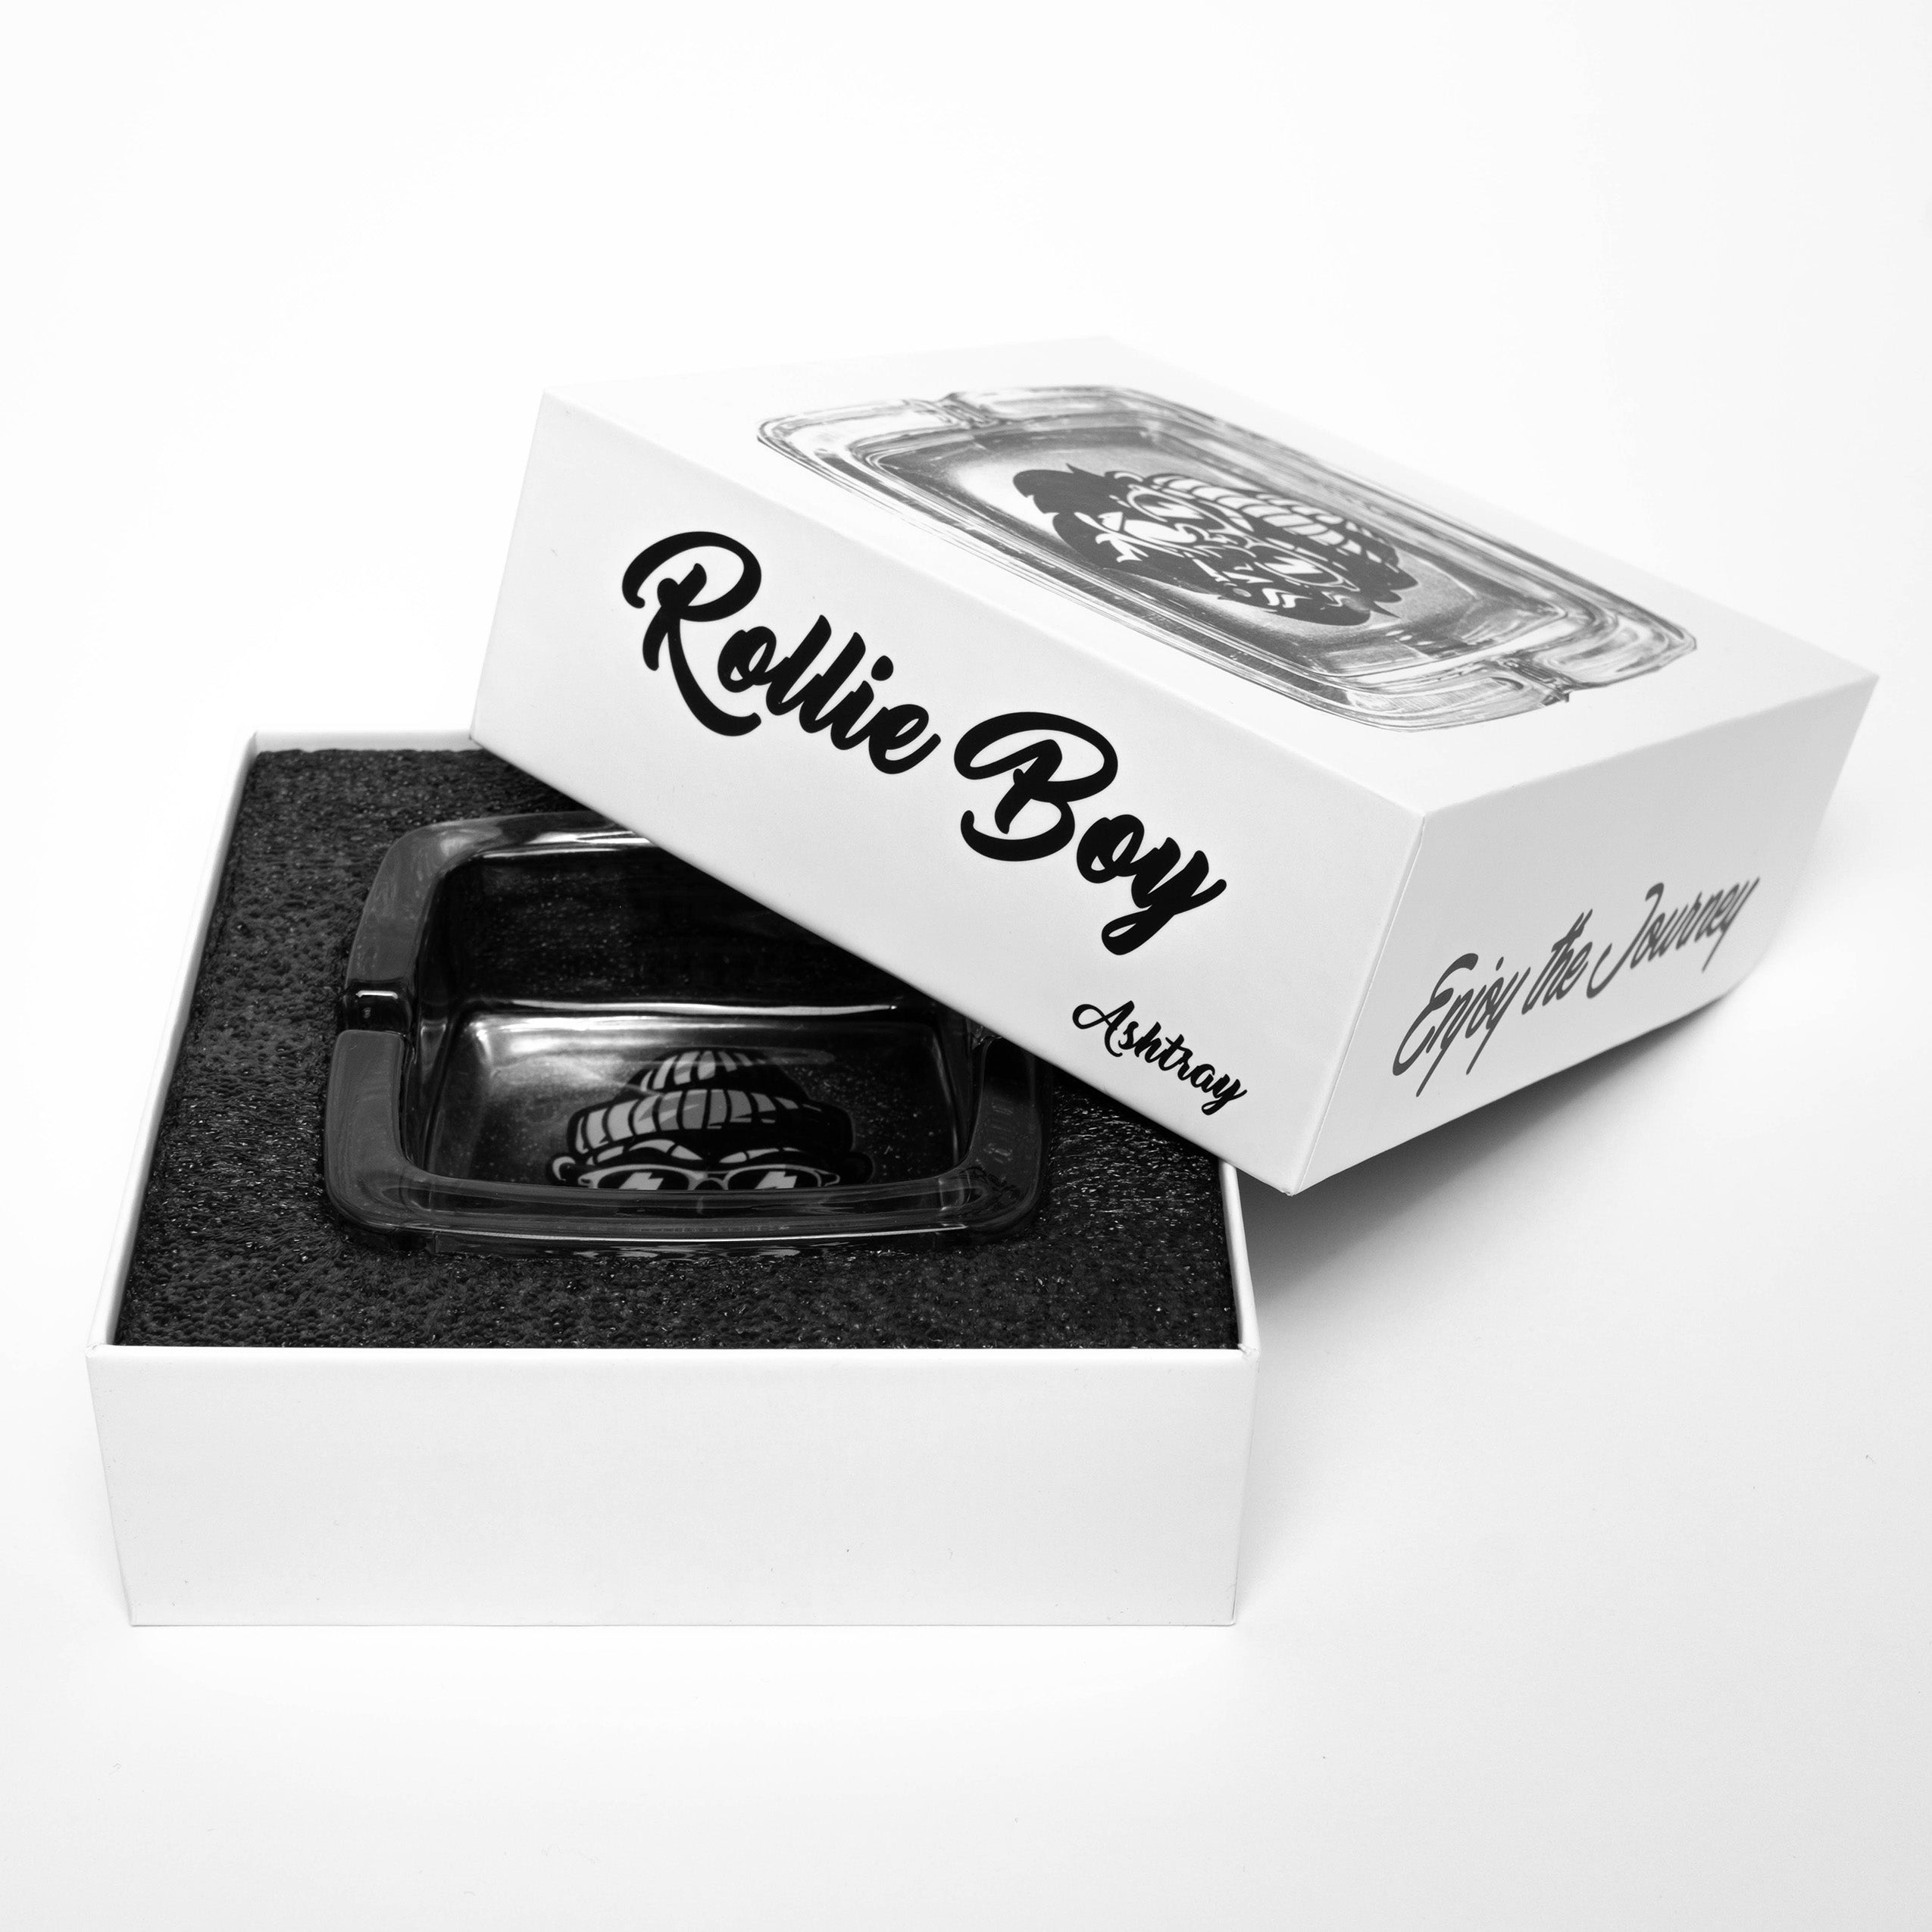 Rollie Boy - Waterproof, Discreet, and Travel-Ready Joint Cases